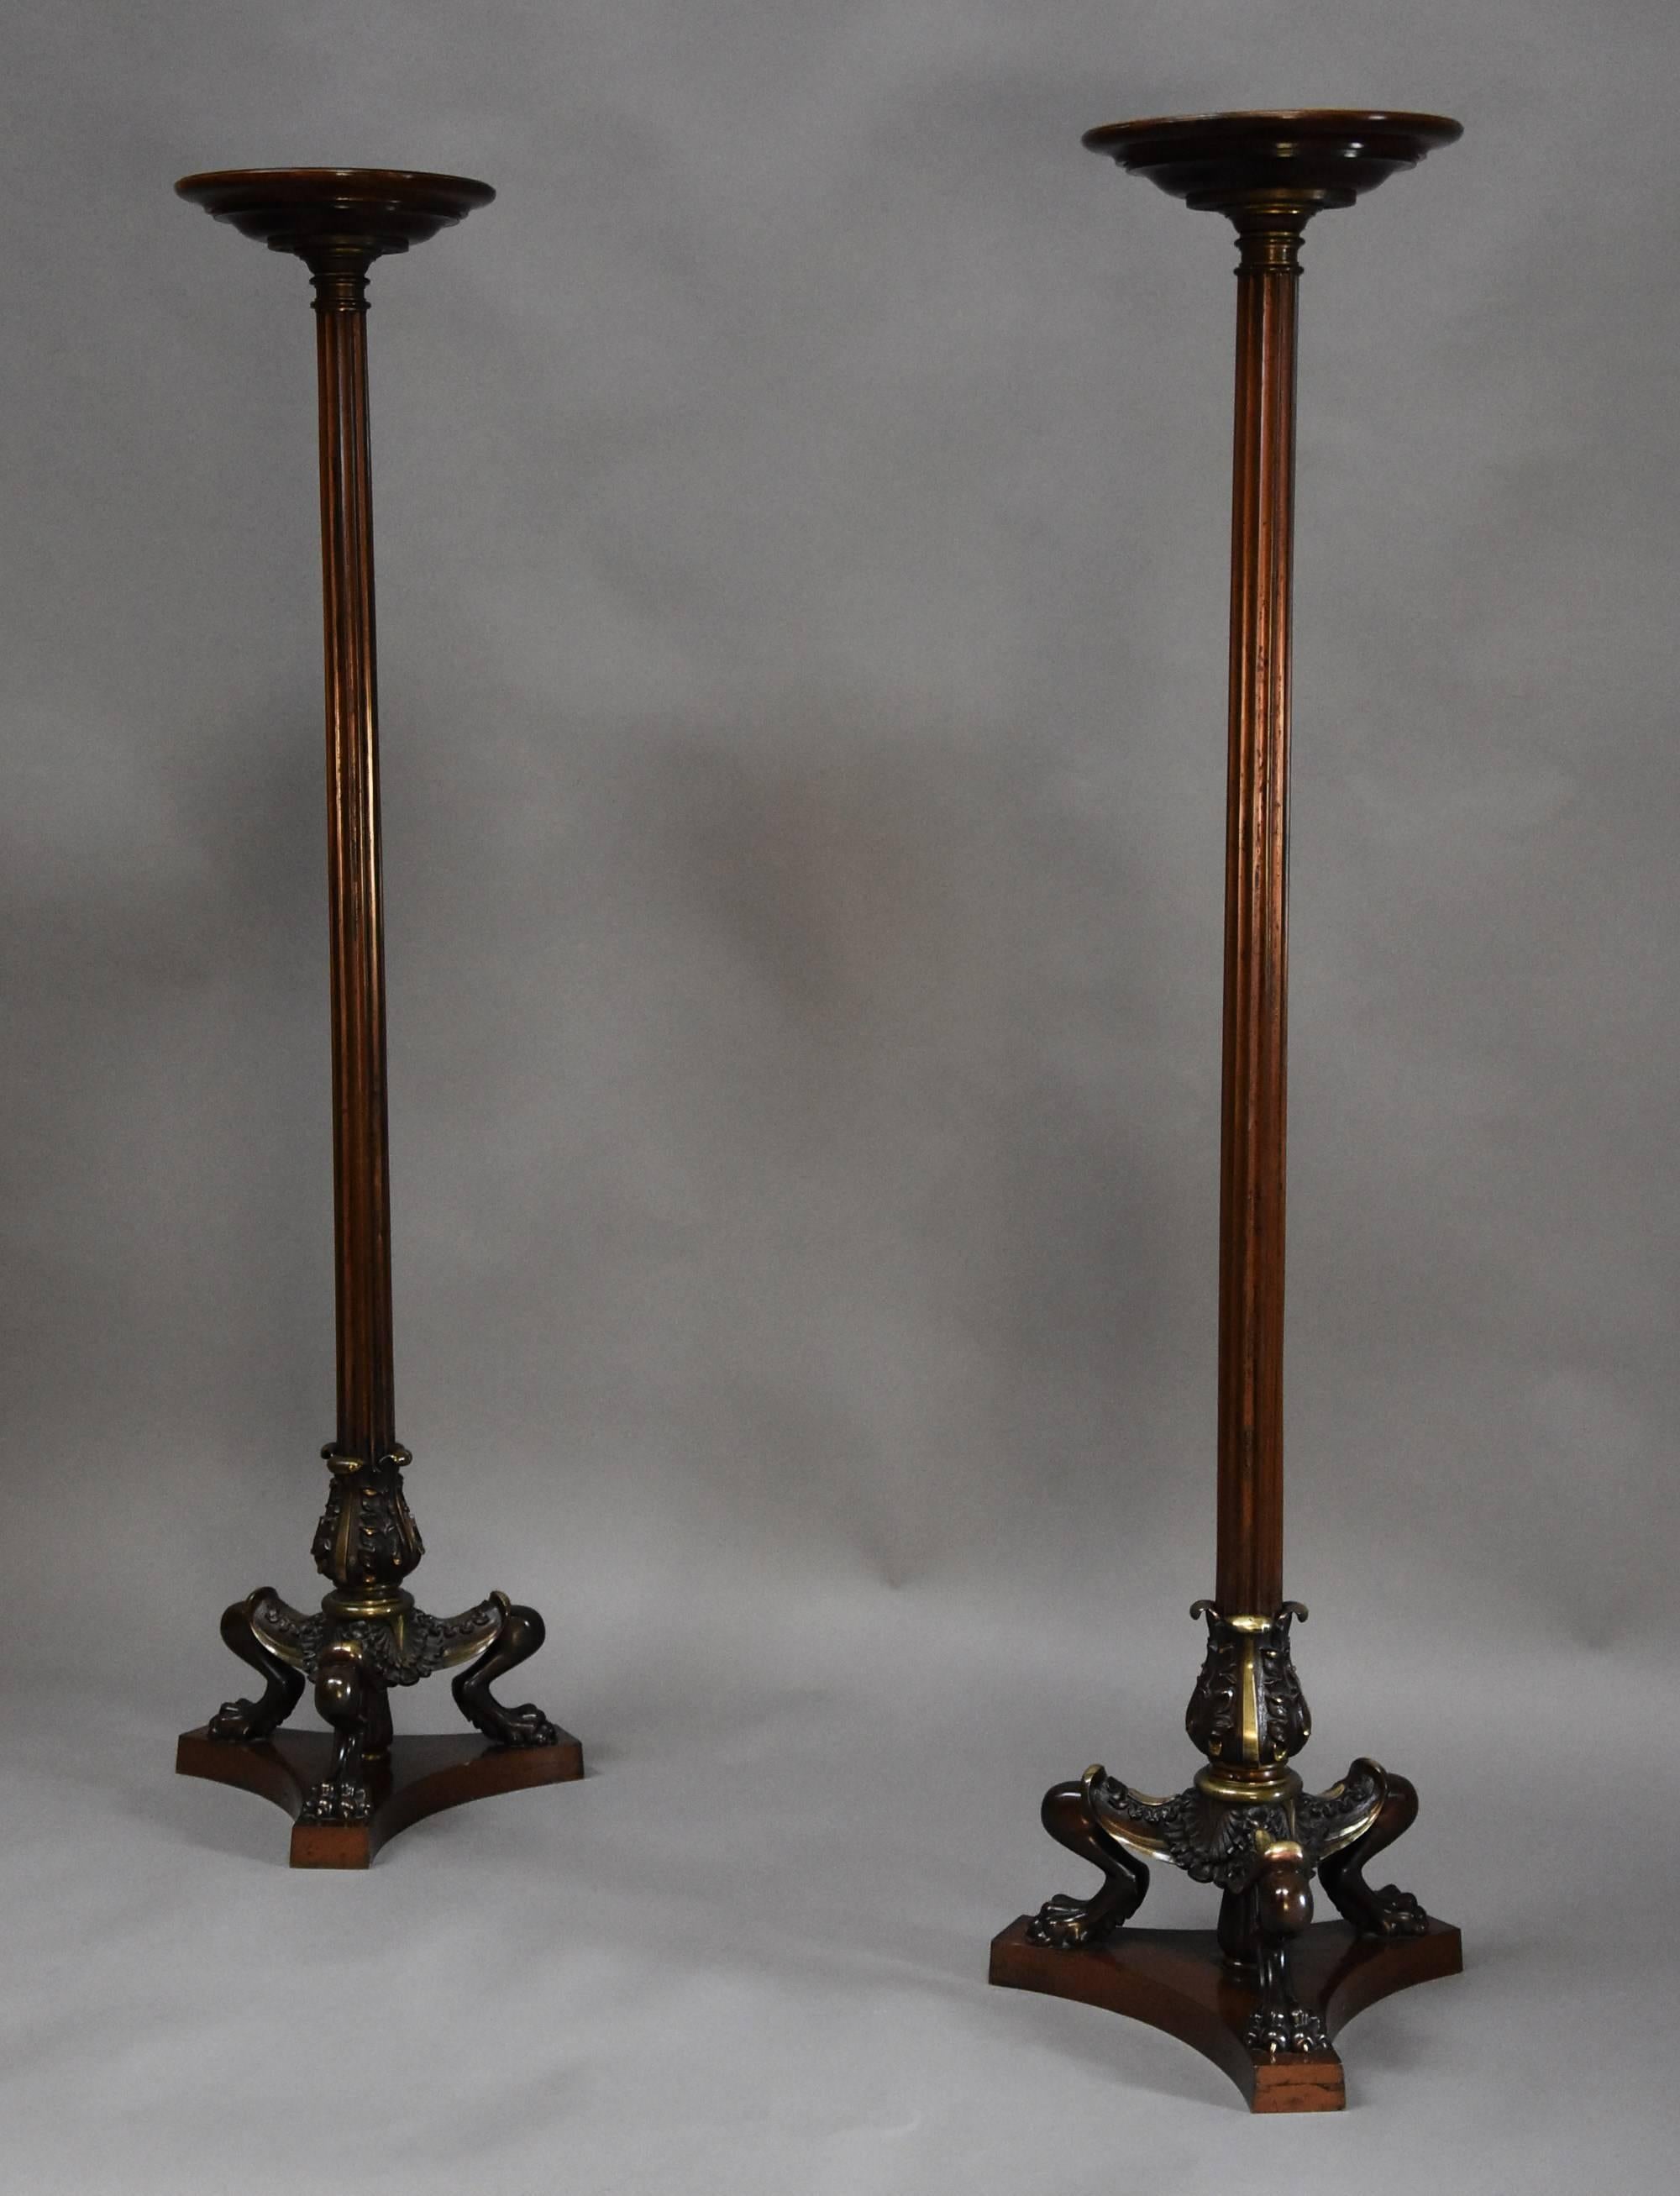 A superb pair of Regency style bronze and mahogany torcheres in the manner of George Smith or Thomas Hope and being in the Egyptian style which was a typical influence in this period.

The torcheres each consist of a circular mahogany top leading